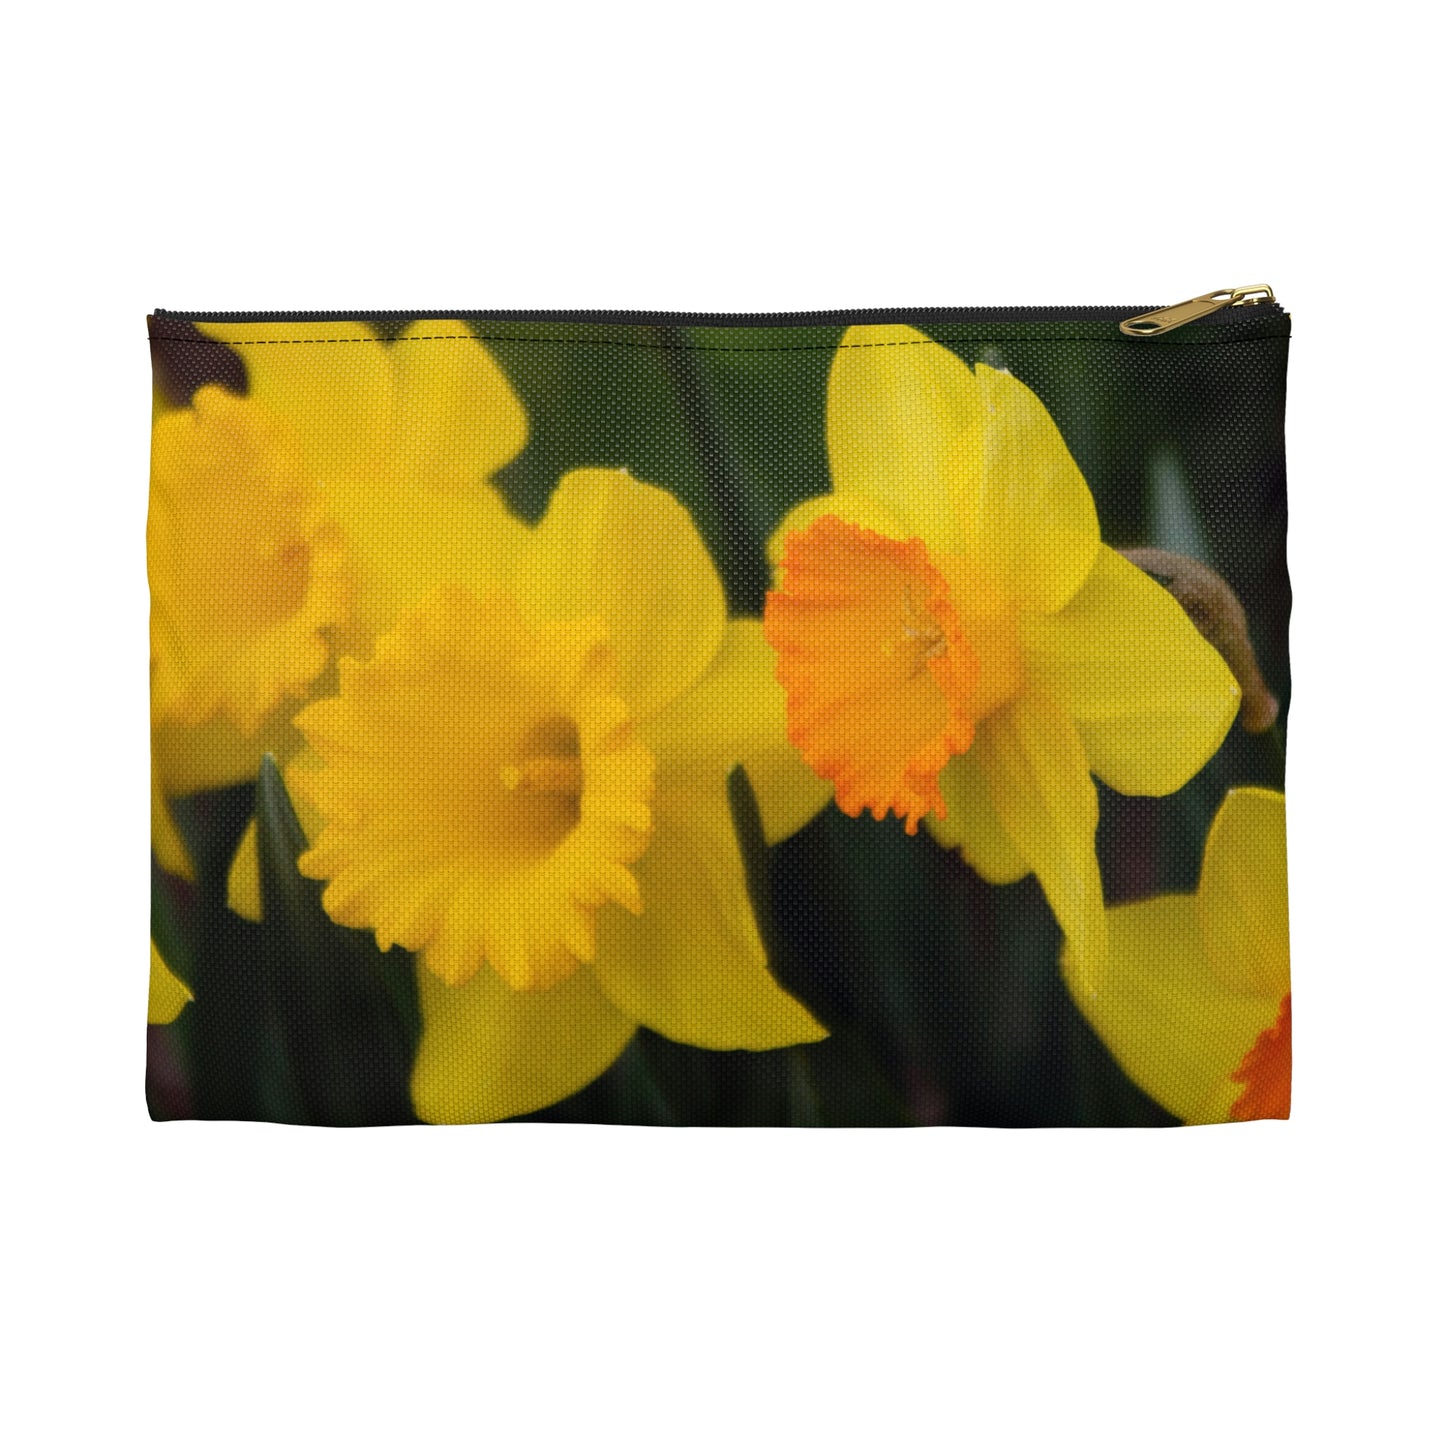 Flowers 10 Accessory Pouch